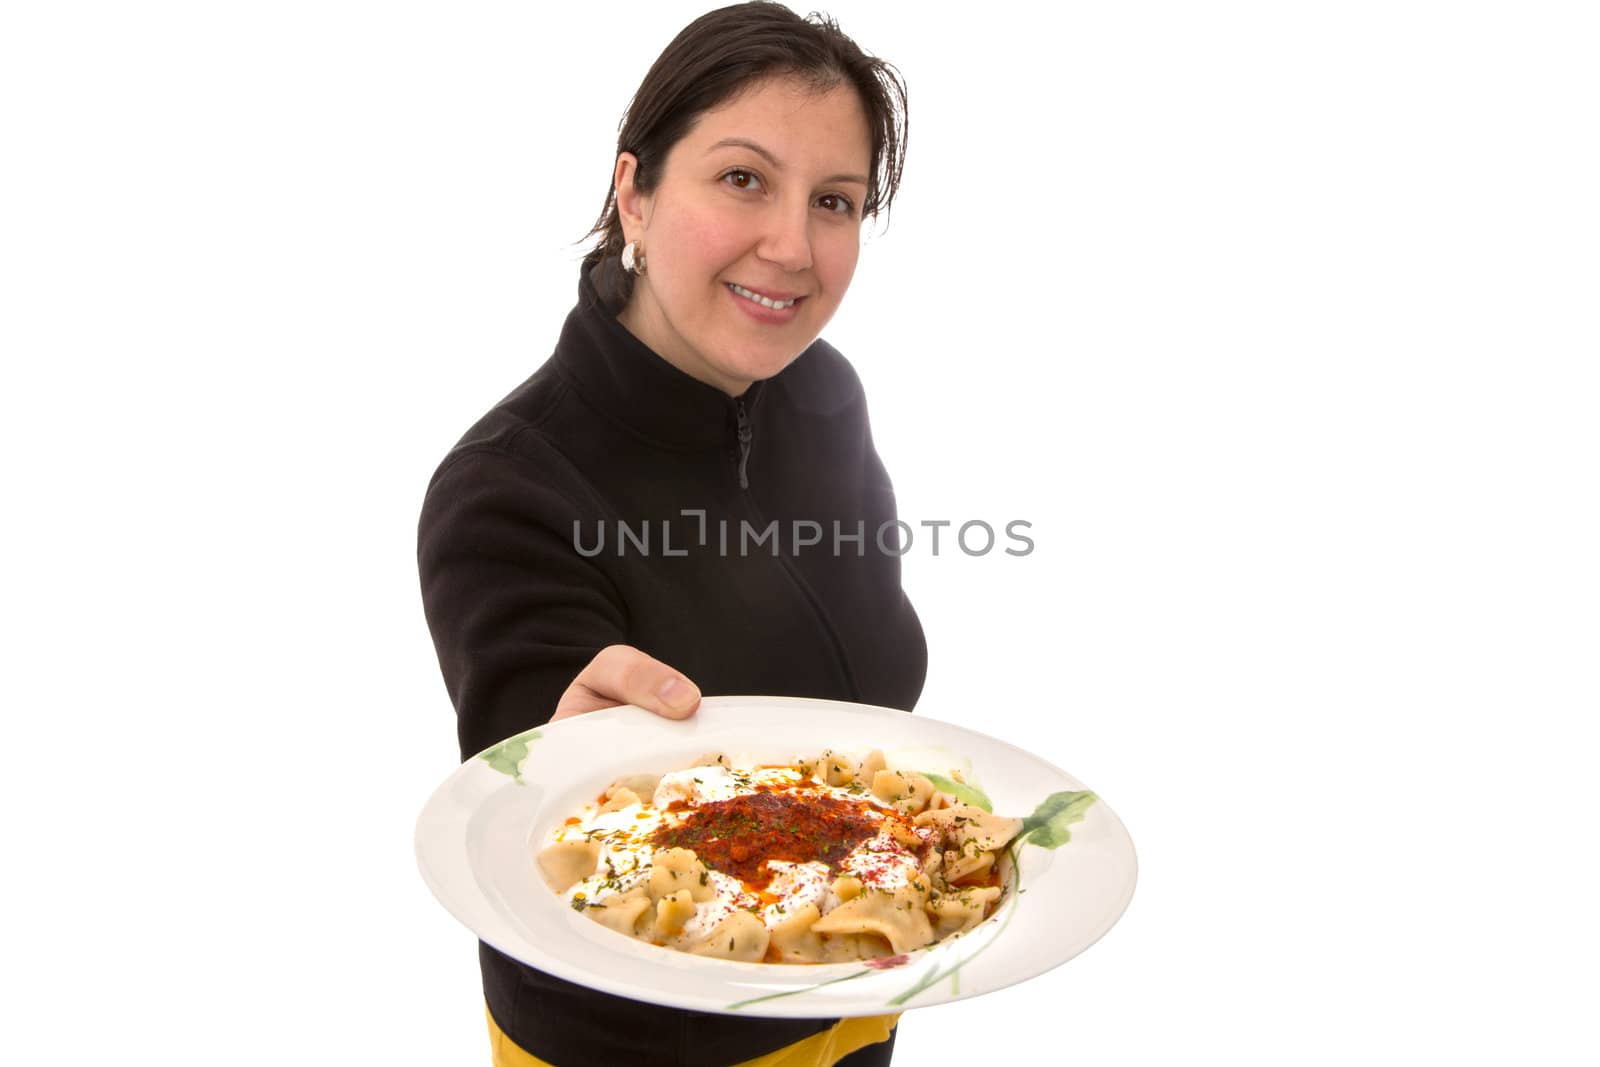 Turkish girl proudly presenting Turkish version of multinational food manti in a plate. Topped with yogurt tomato sauce, parsley flakes and spices. Isolated on white with copy space.